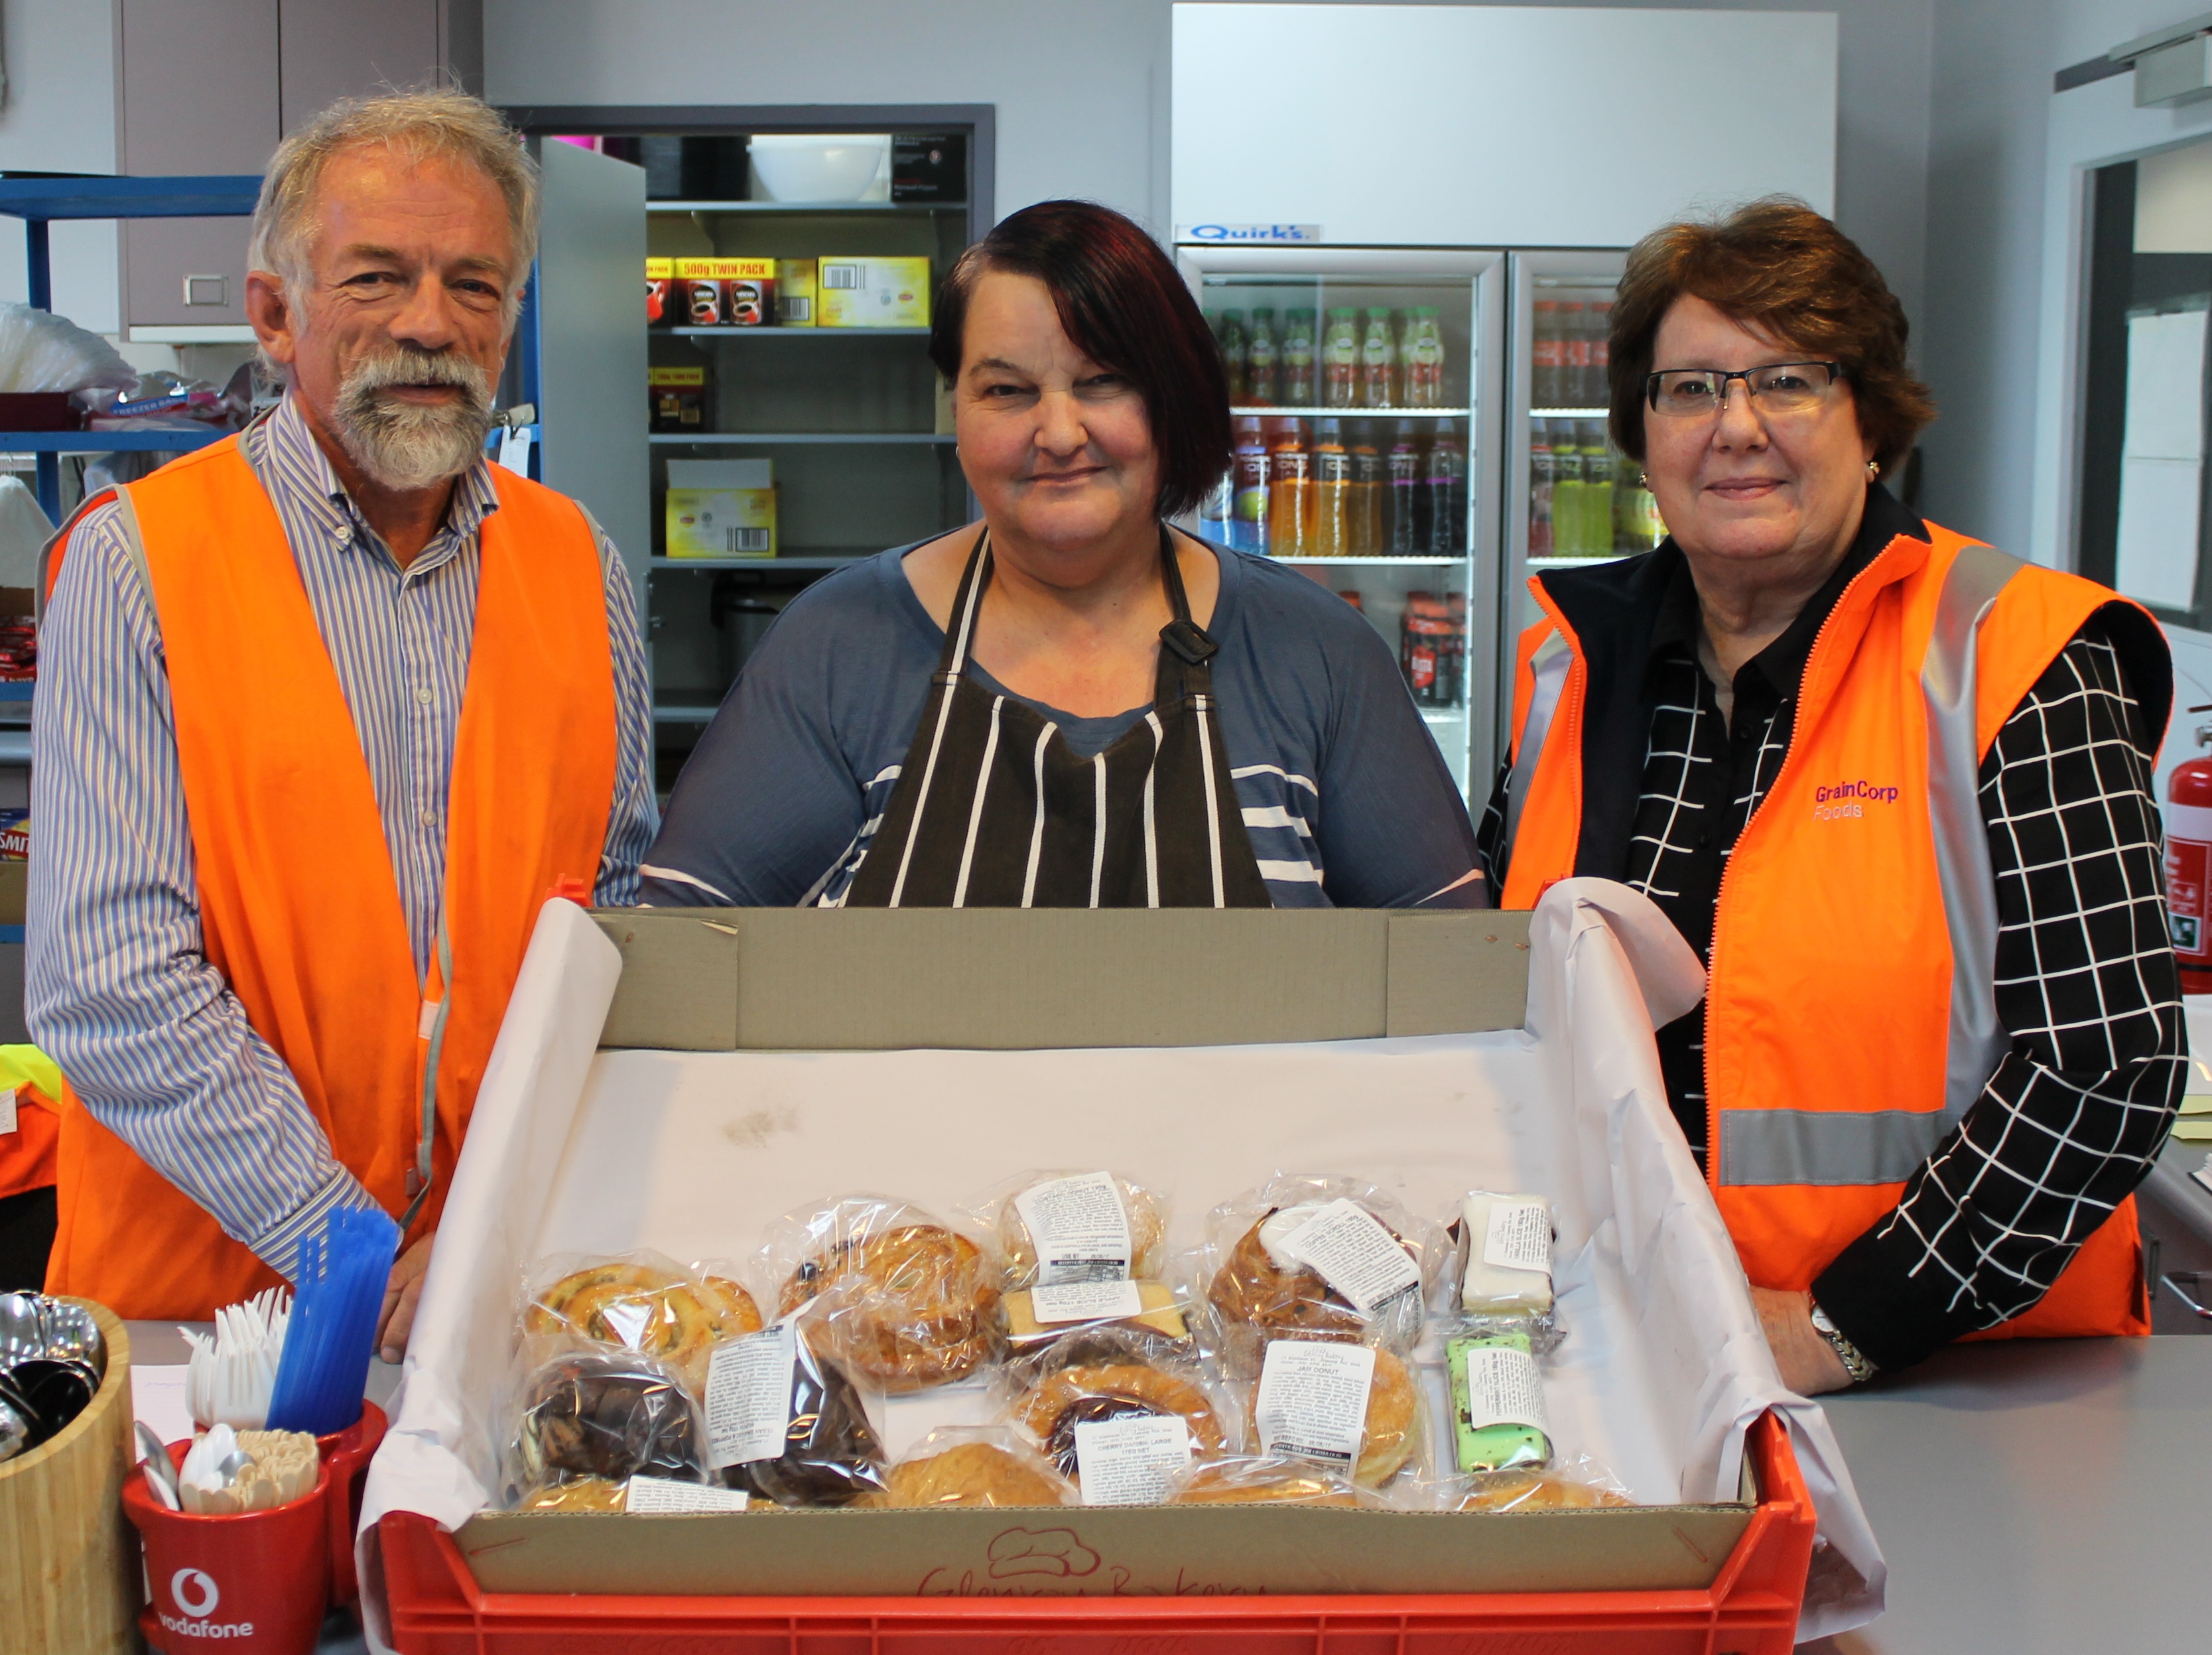 GrainCorp’s Graeme and Liz with MatchWorks job seeker Leanne (middle).